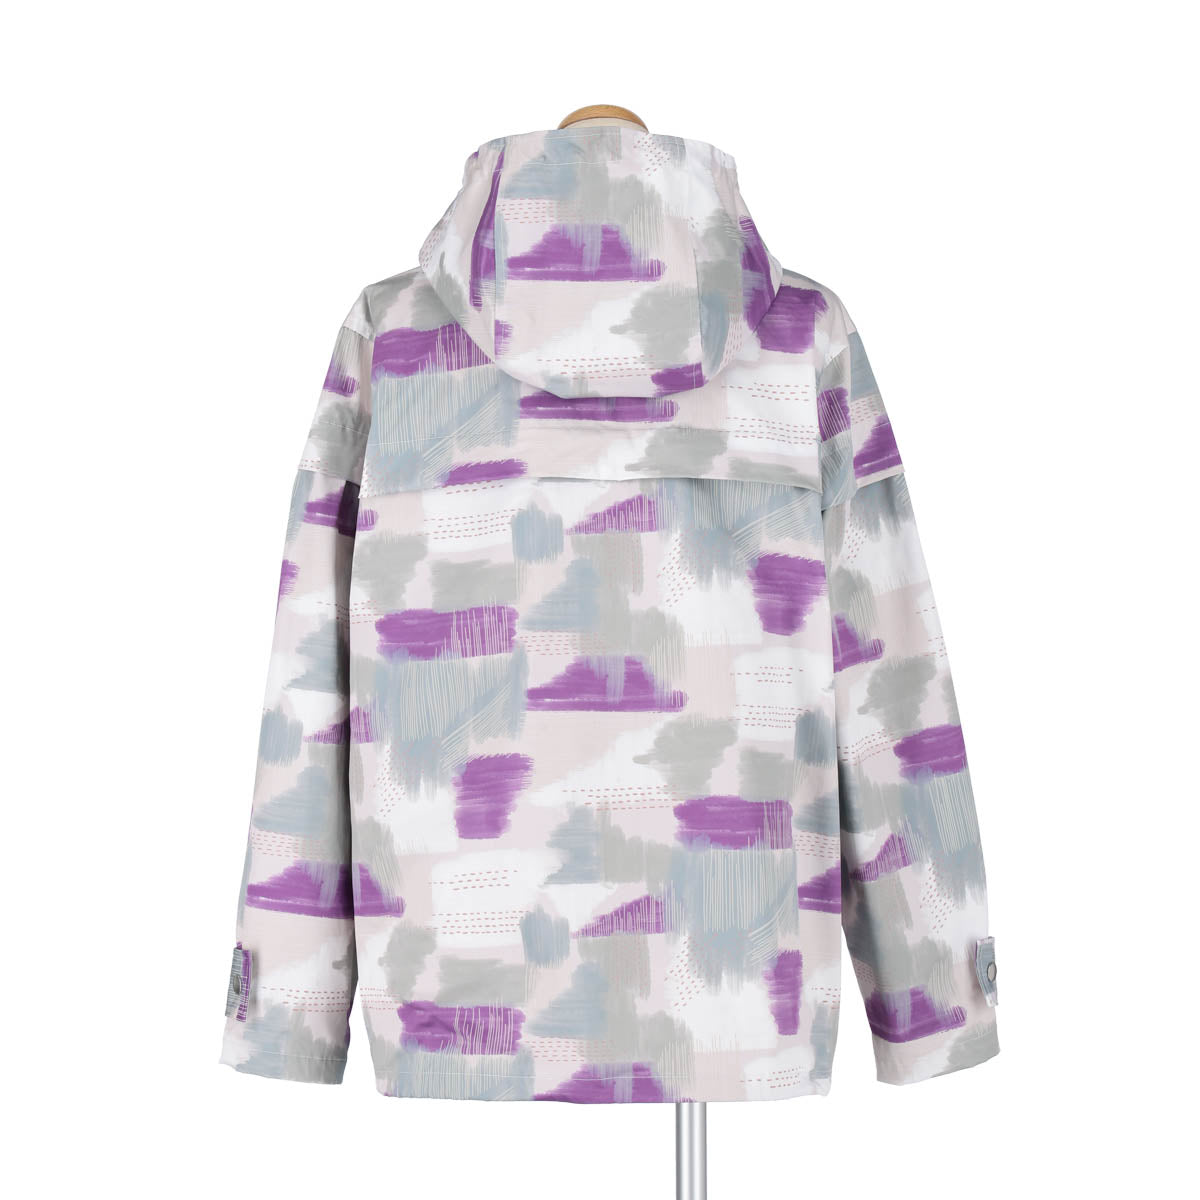 WATER COLOR GRAPHIC PRINT JACKET